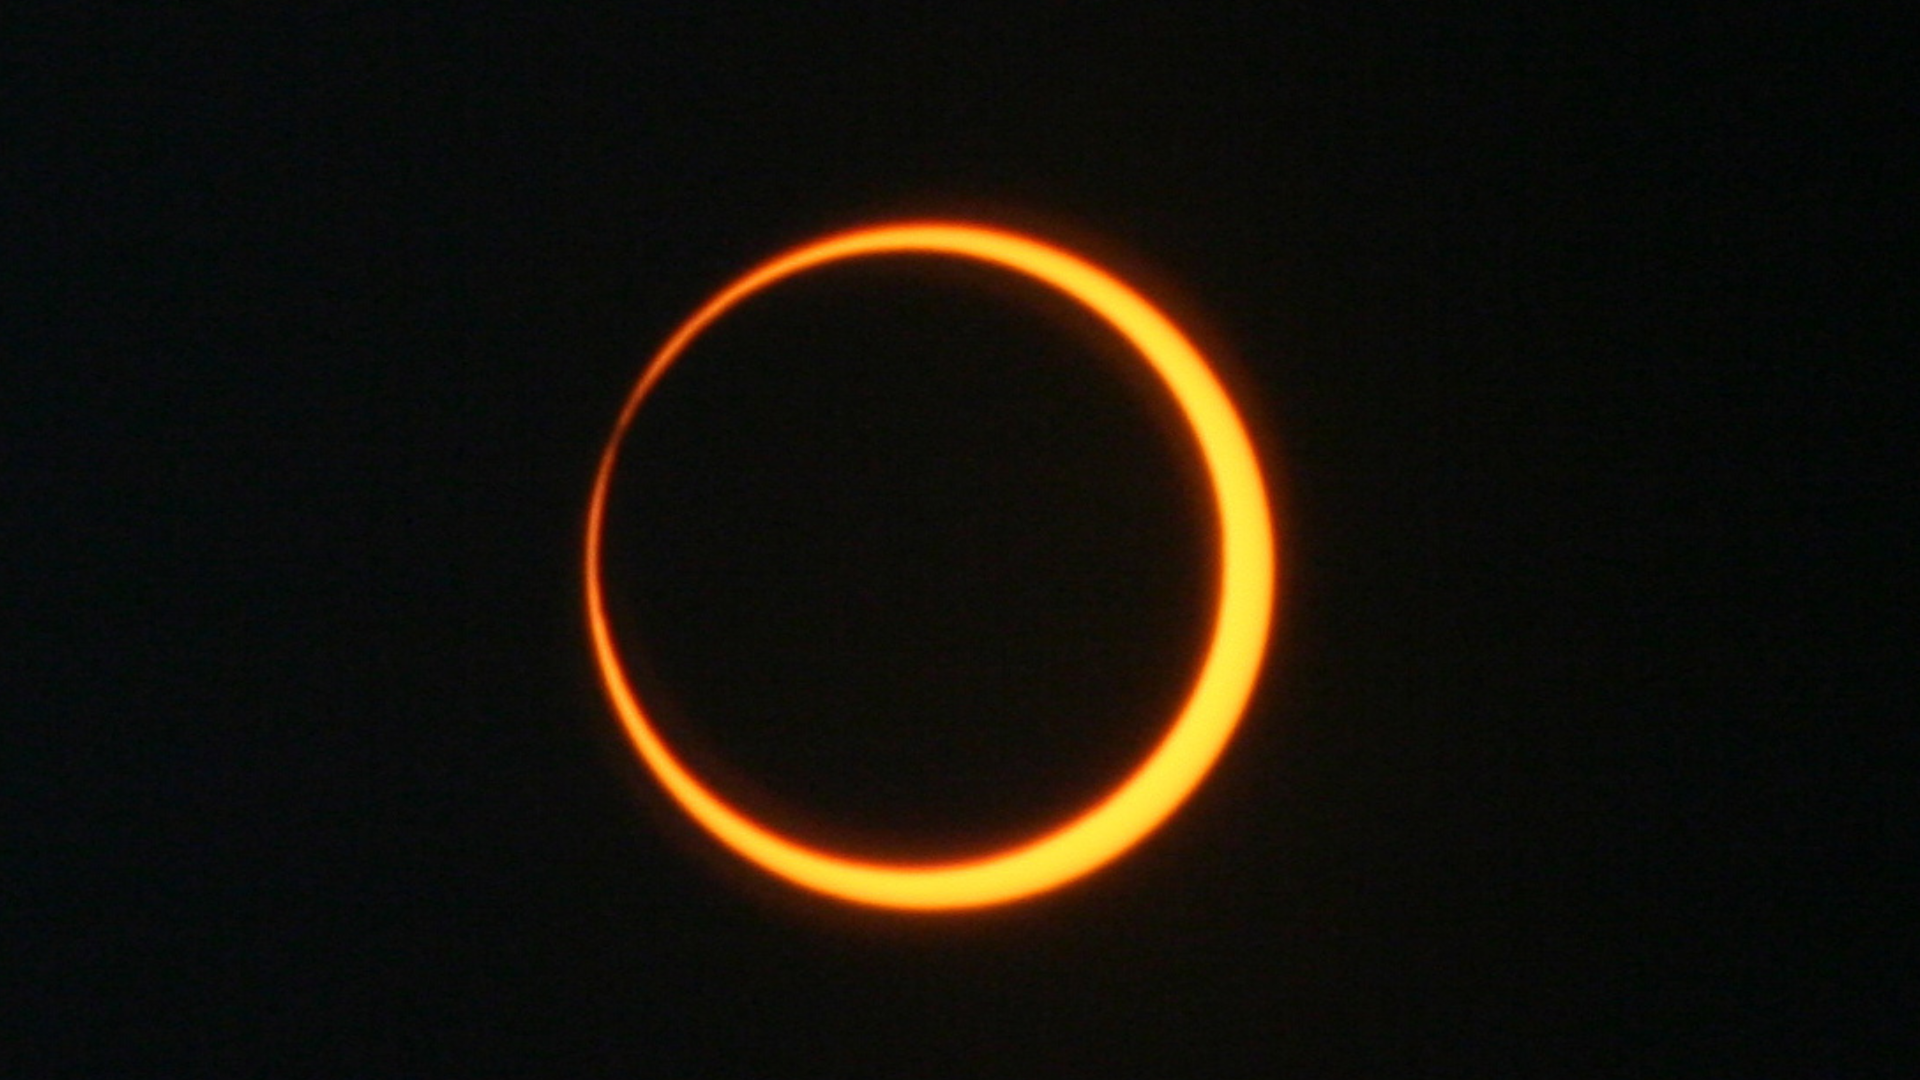 October’s new moon brings us a ‘ring of fire’ solar eclipse Space